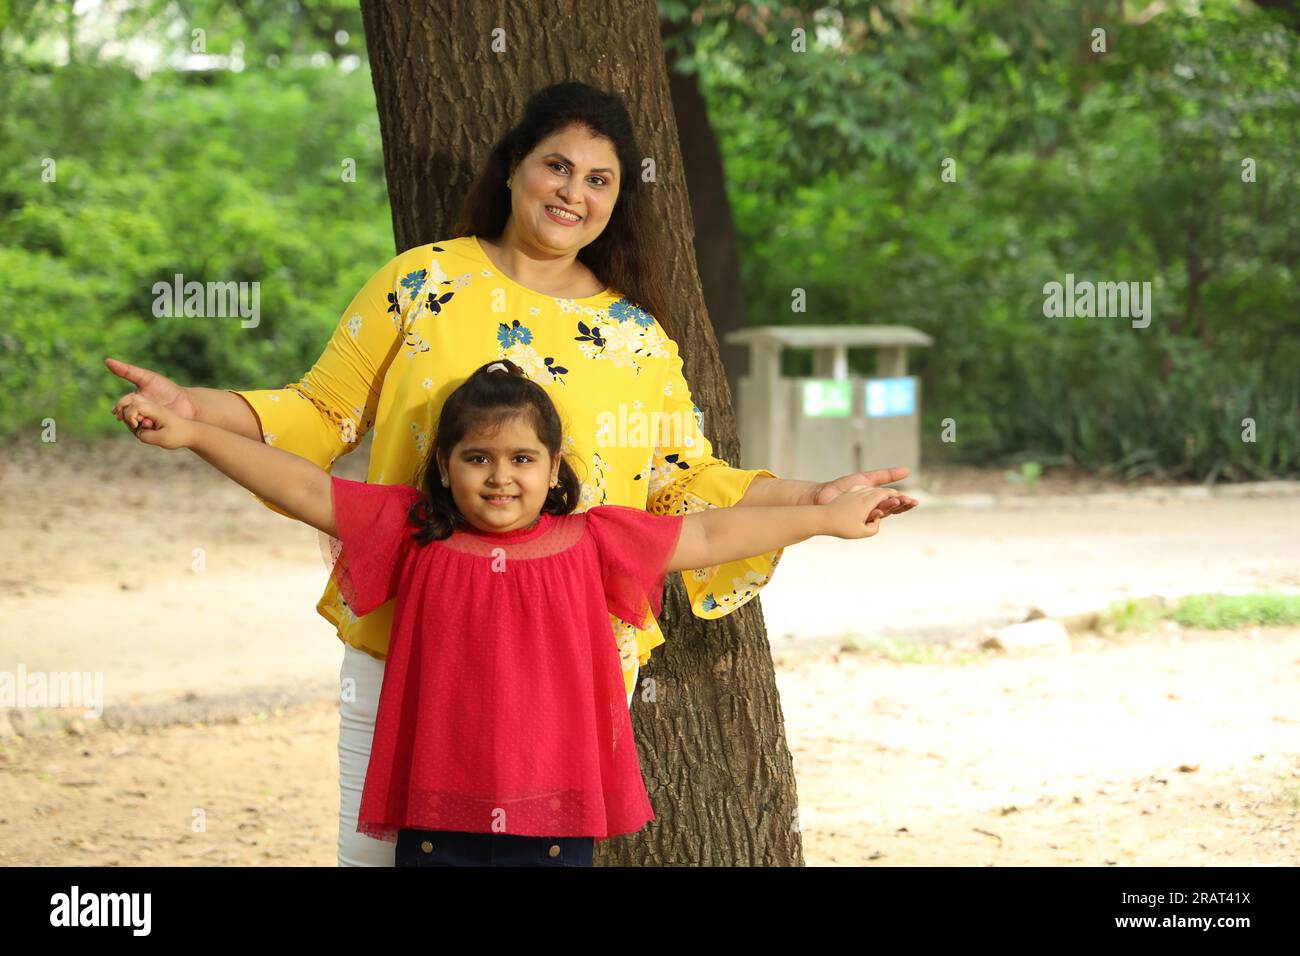 Happy mother and daughter enjoying their time together in a public park. single mother playing with her daughter in green and clean atmosphere. Stock Photo